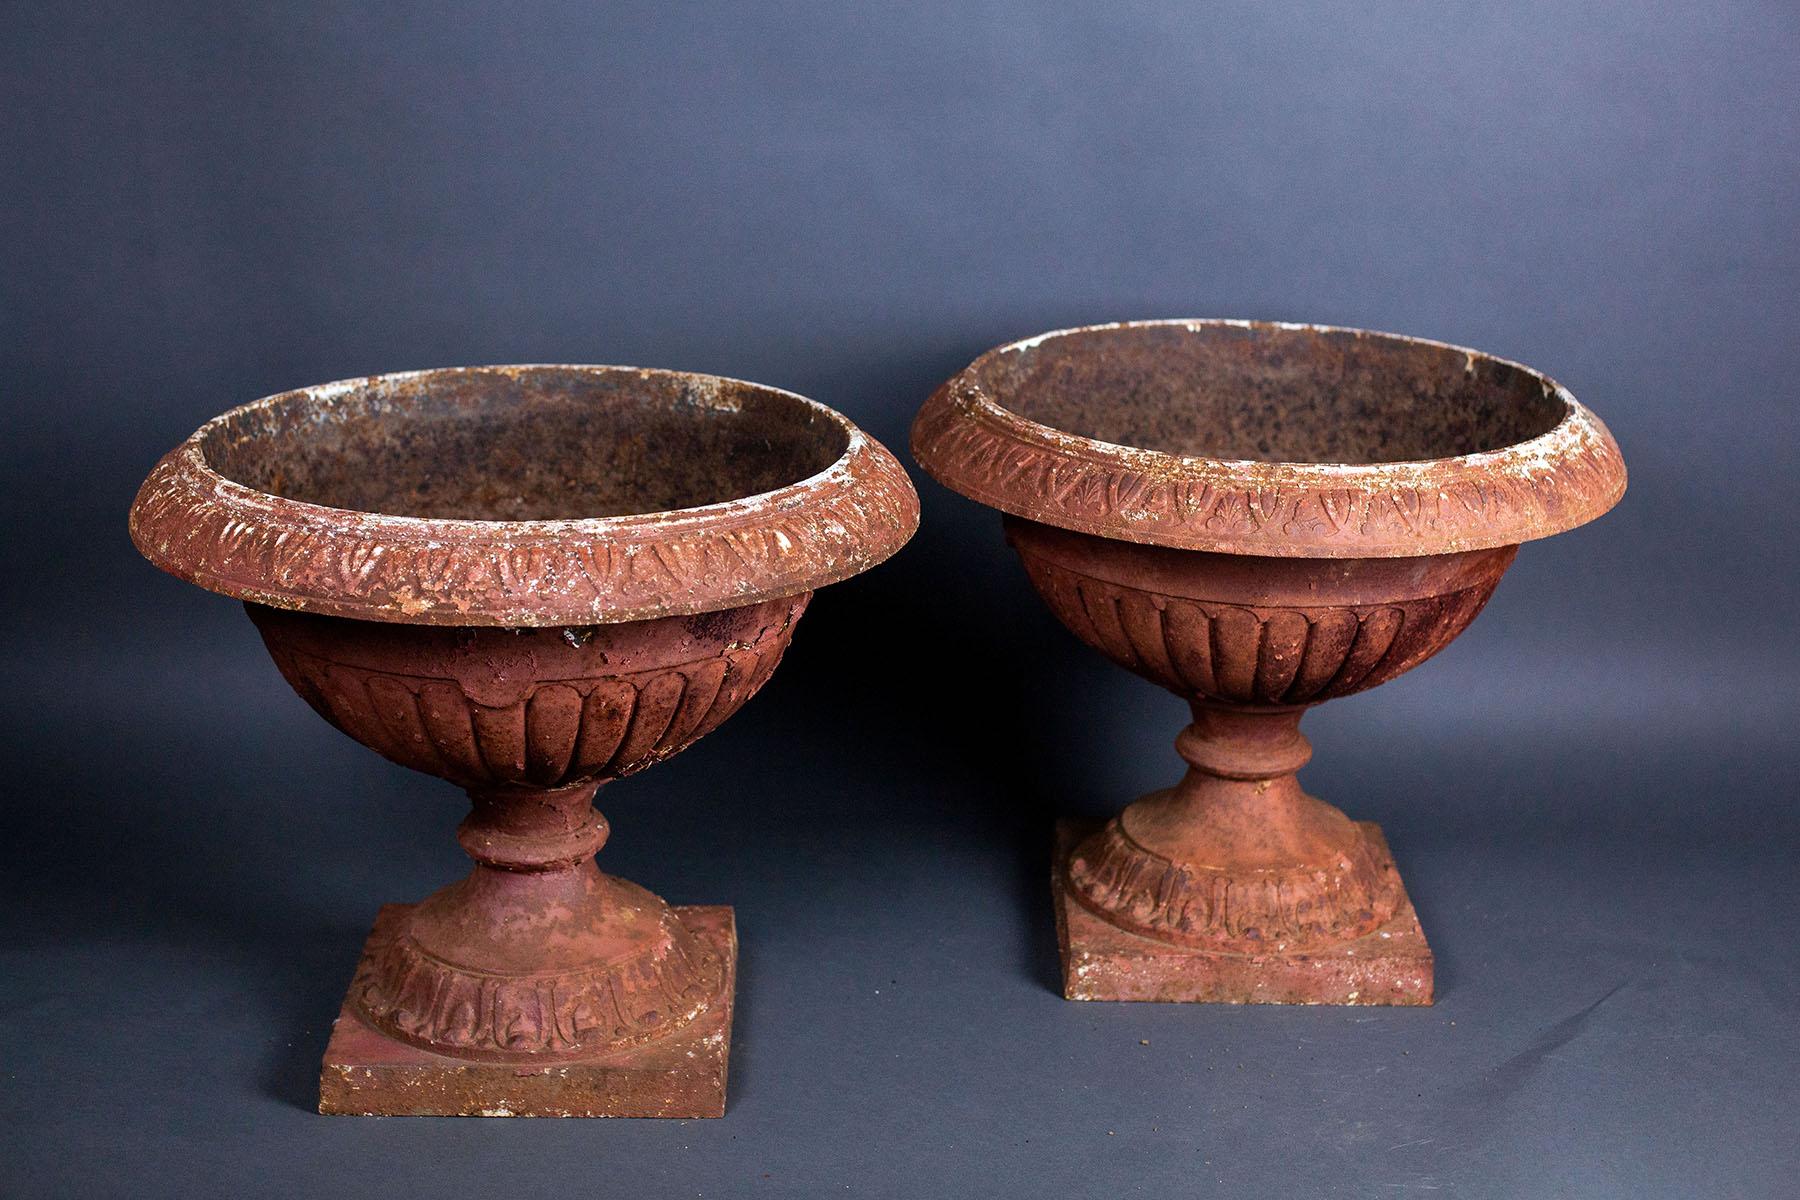 For your consideration, fleurdetroit presents this pair of cast iron garden urns from the early twentieth century. Fresh from an East Coast Estate, these charming urns have lived a life of privilege and are now looking for another impressive address